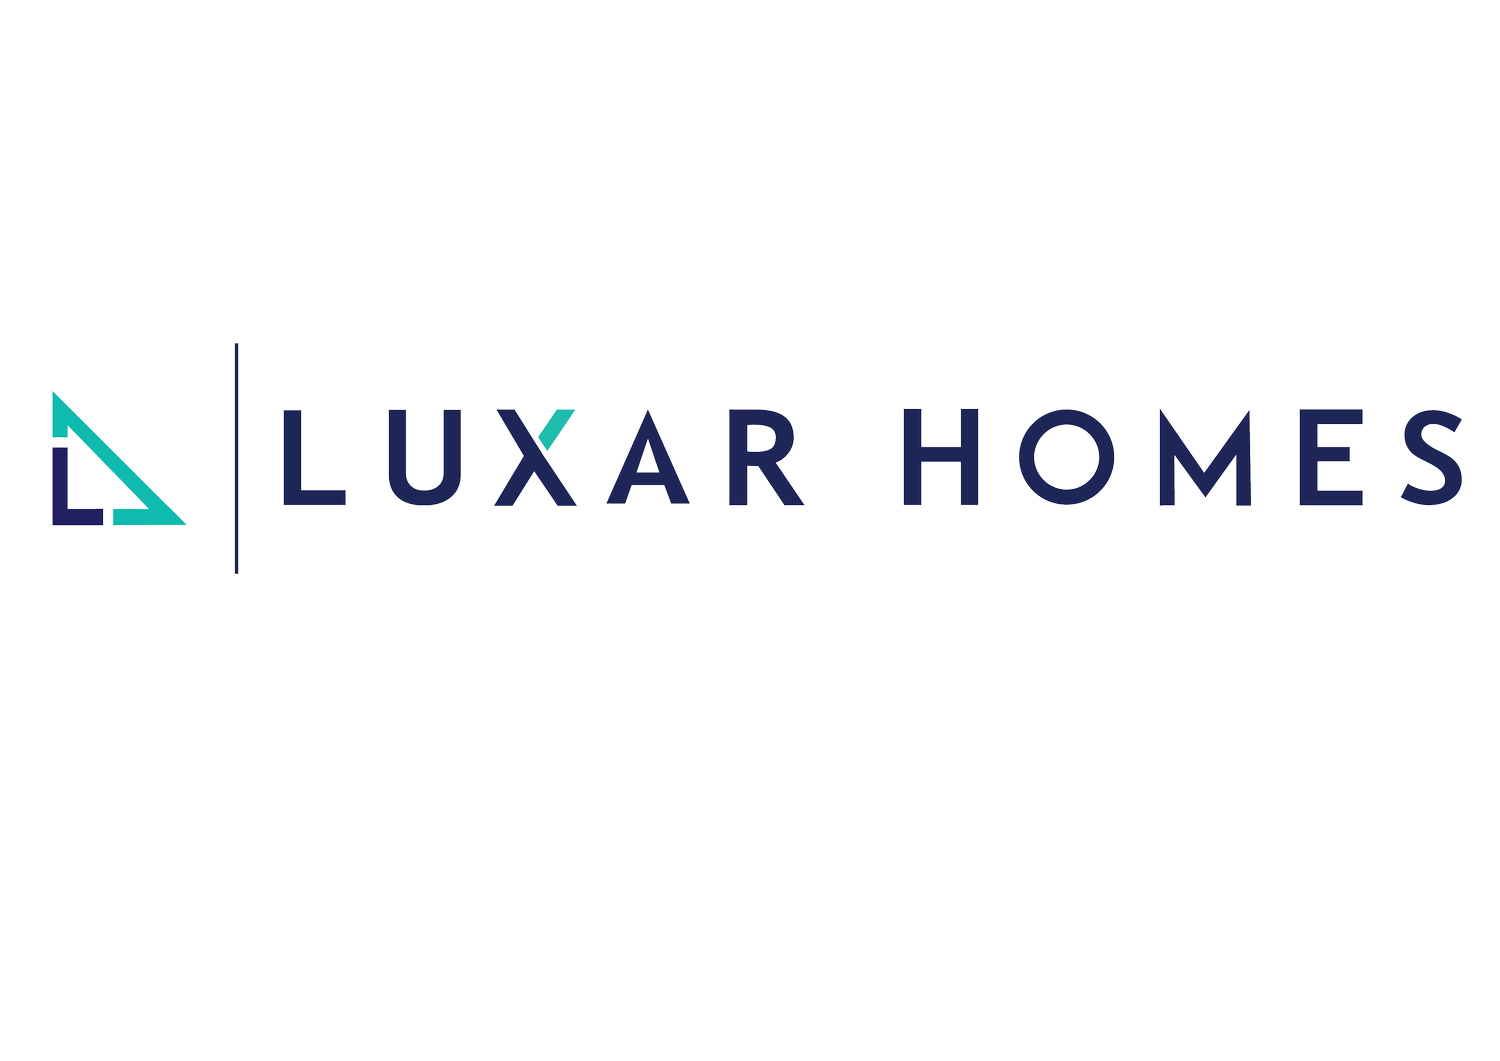 Luxar Homes